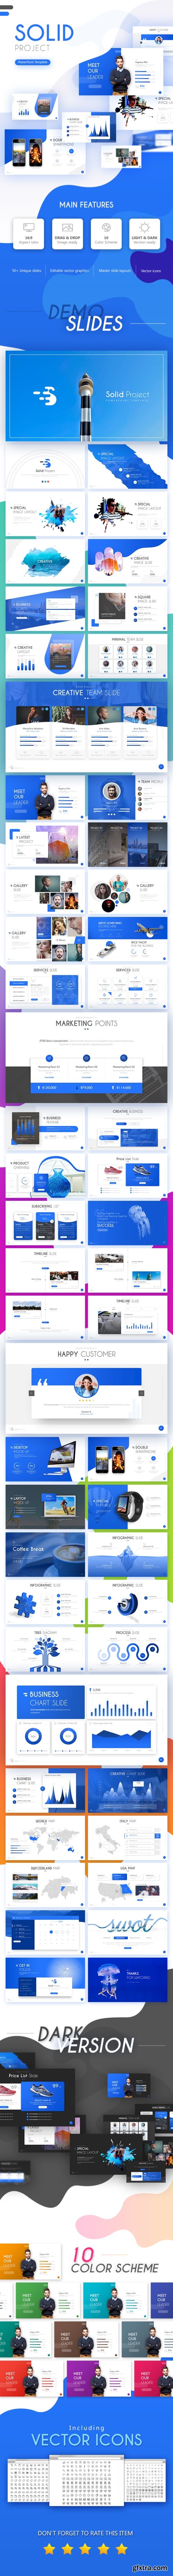 GraphicRiver - Solid Project PowerPoint Template 21021232